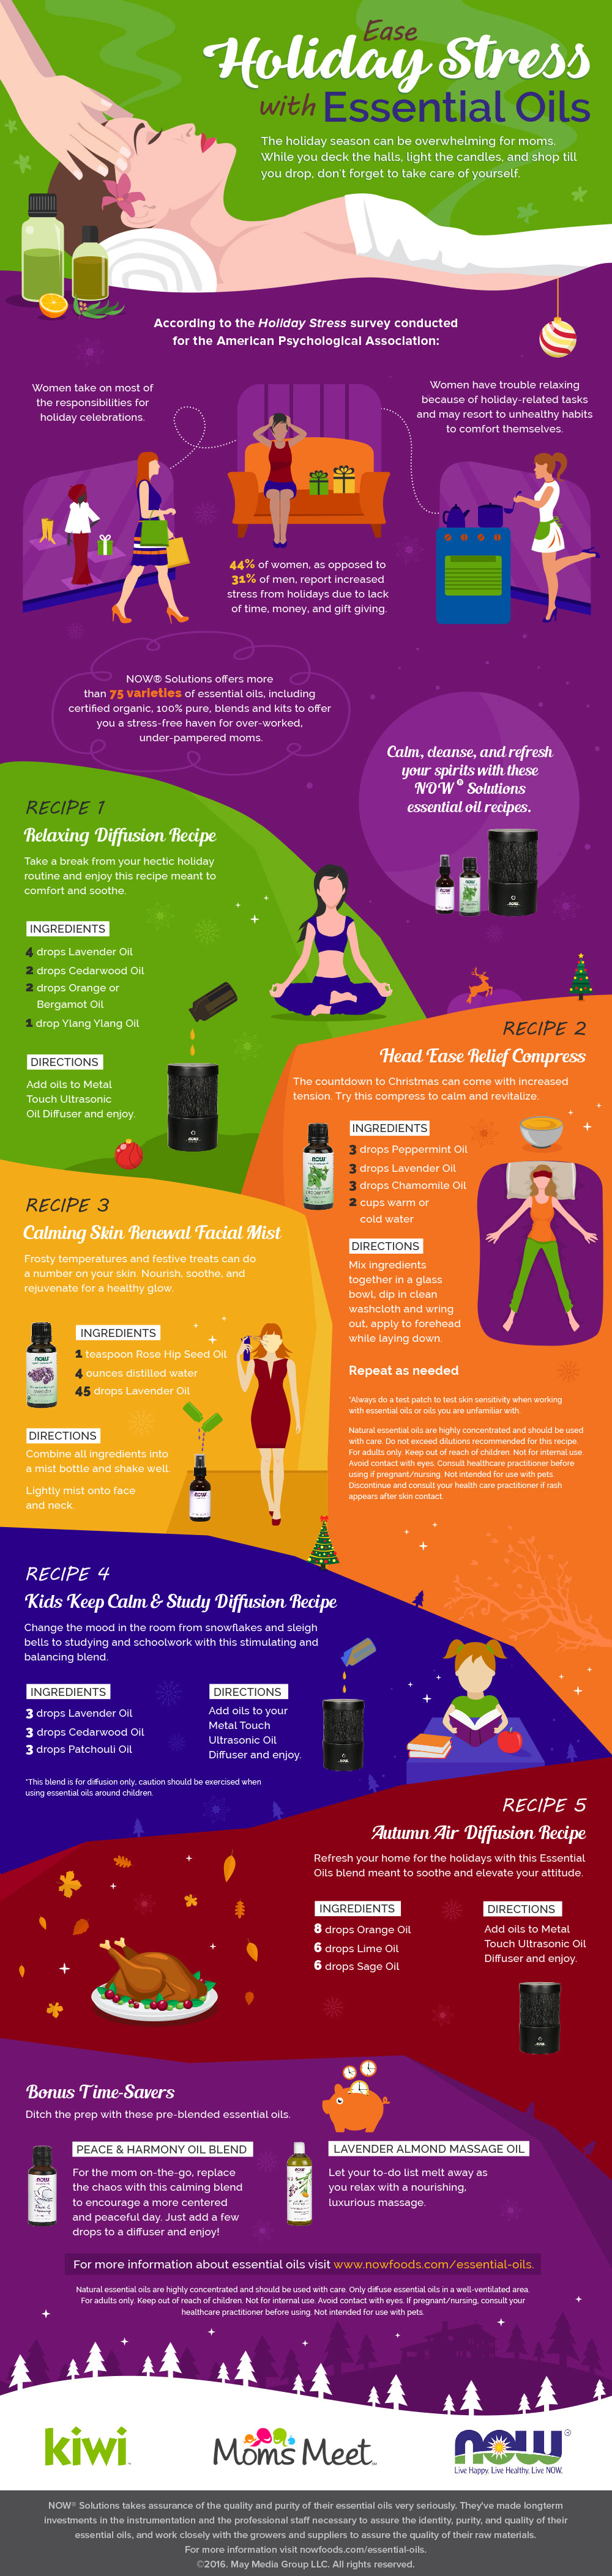 graphic illustration of stress relieving essential oils - green and dark purple background